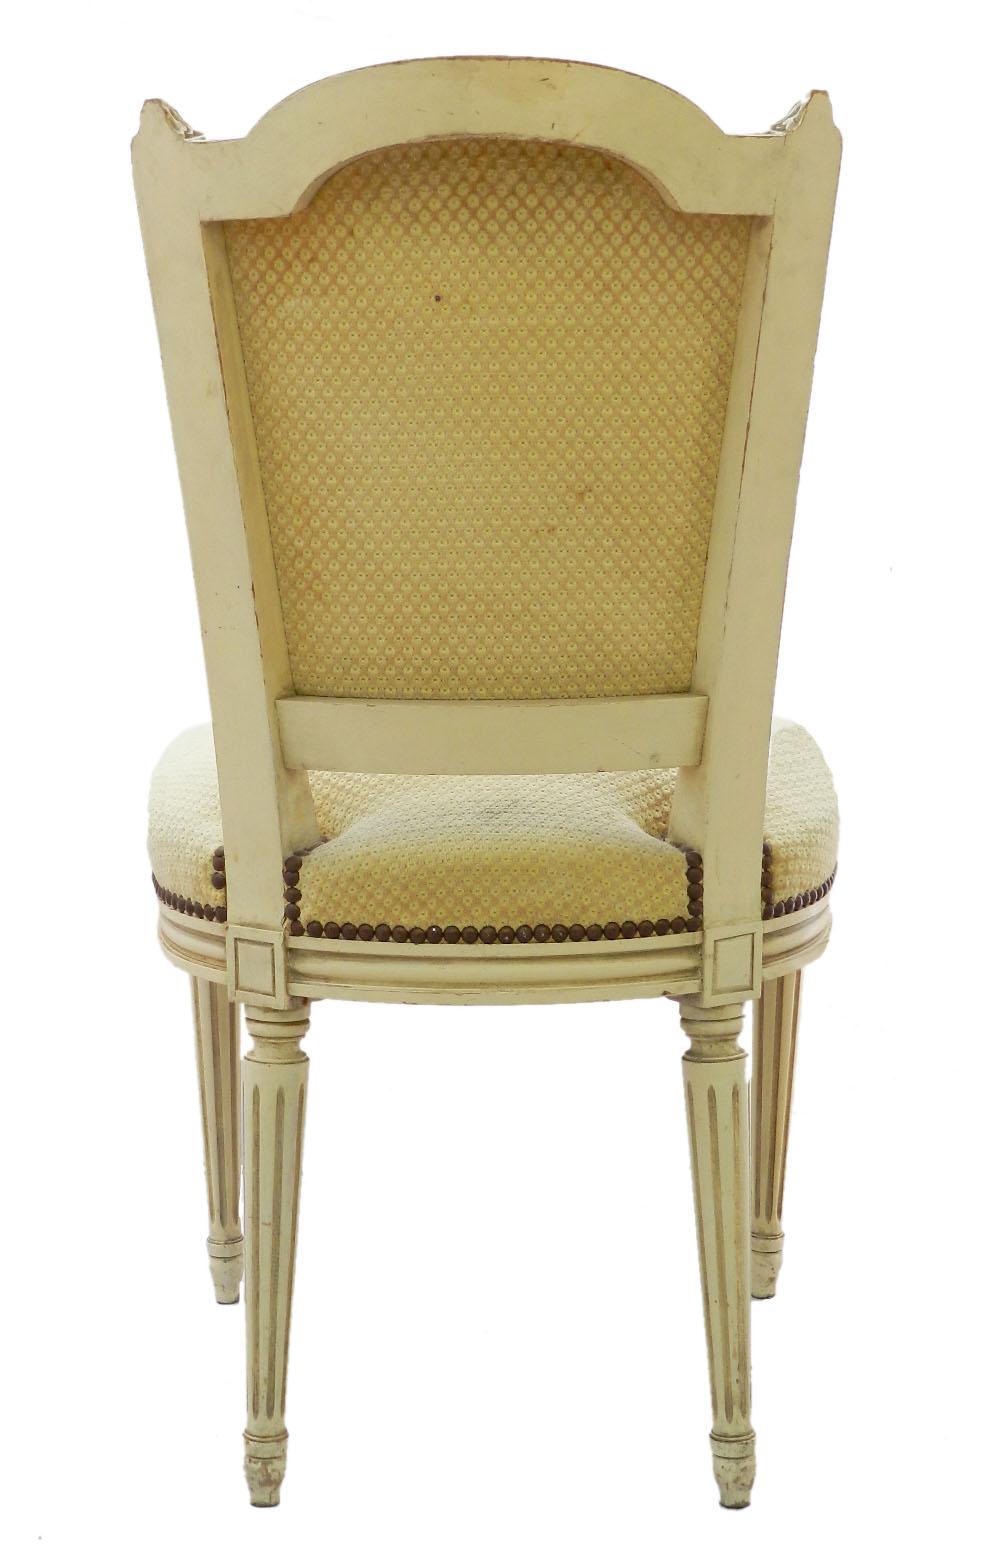 Four French Dining Chairs c1920 Louis XVI Revival Original Paint Upholstered 1